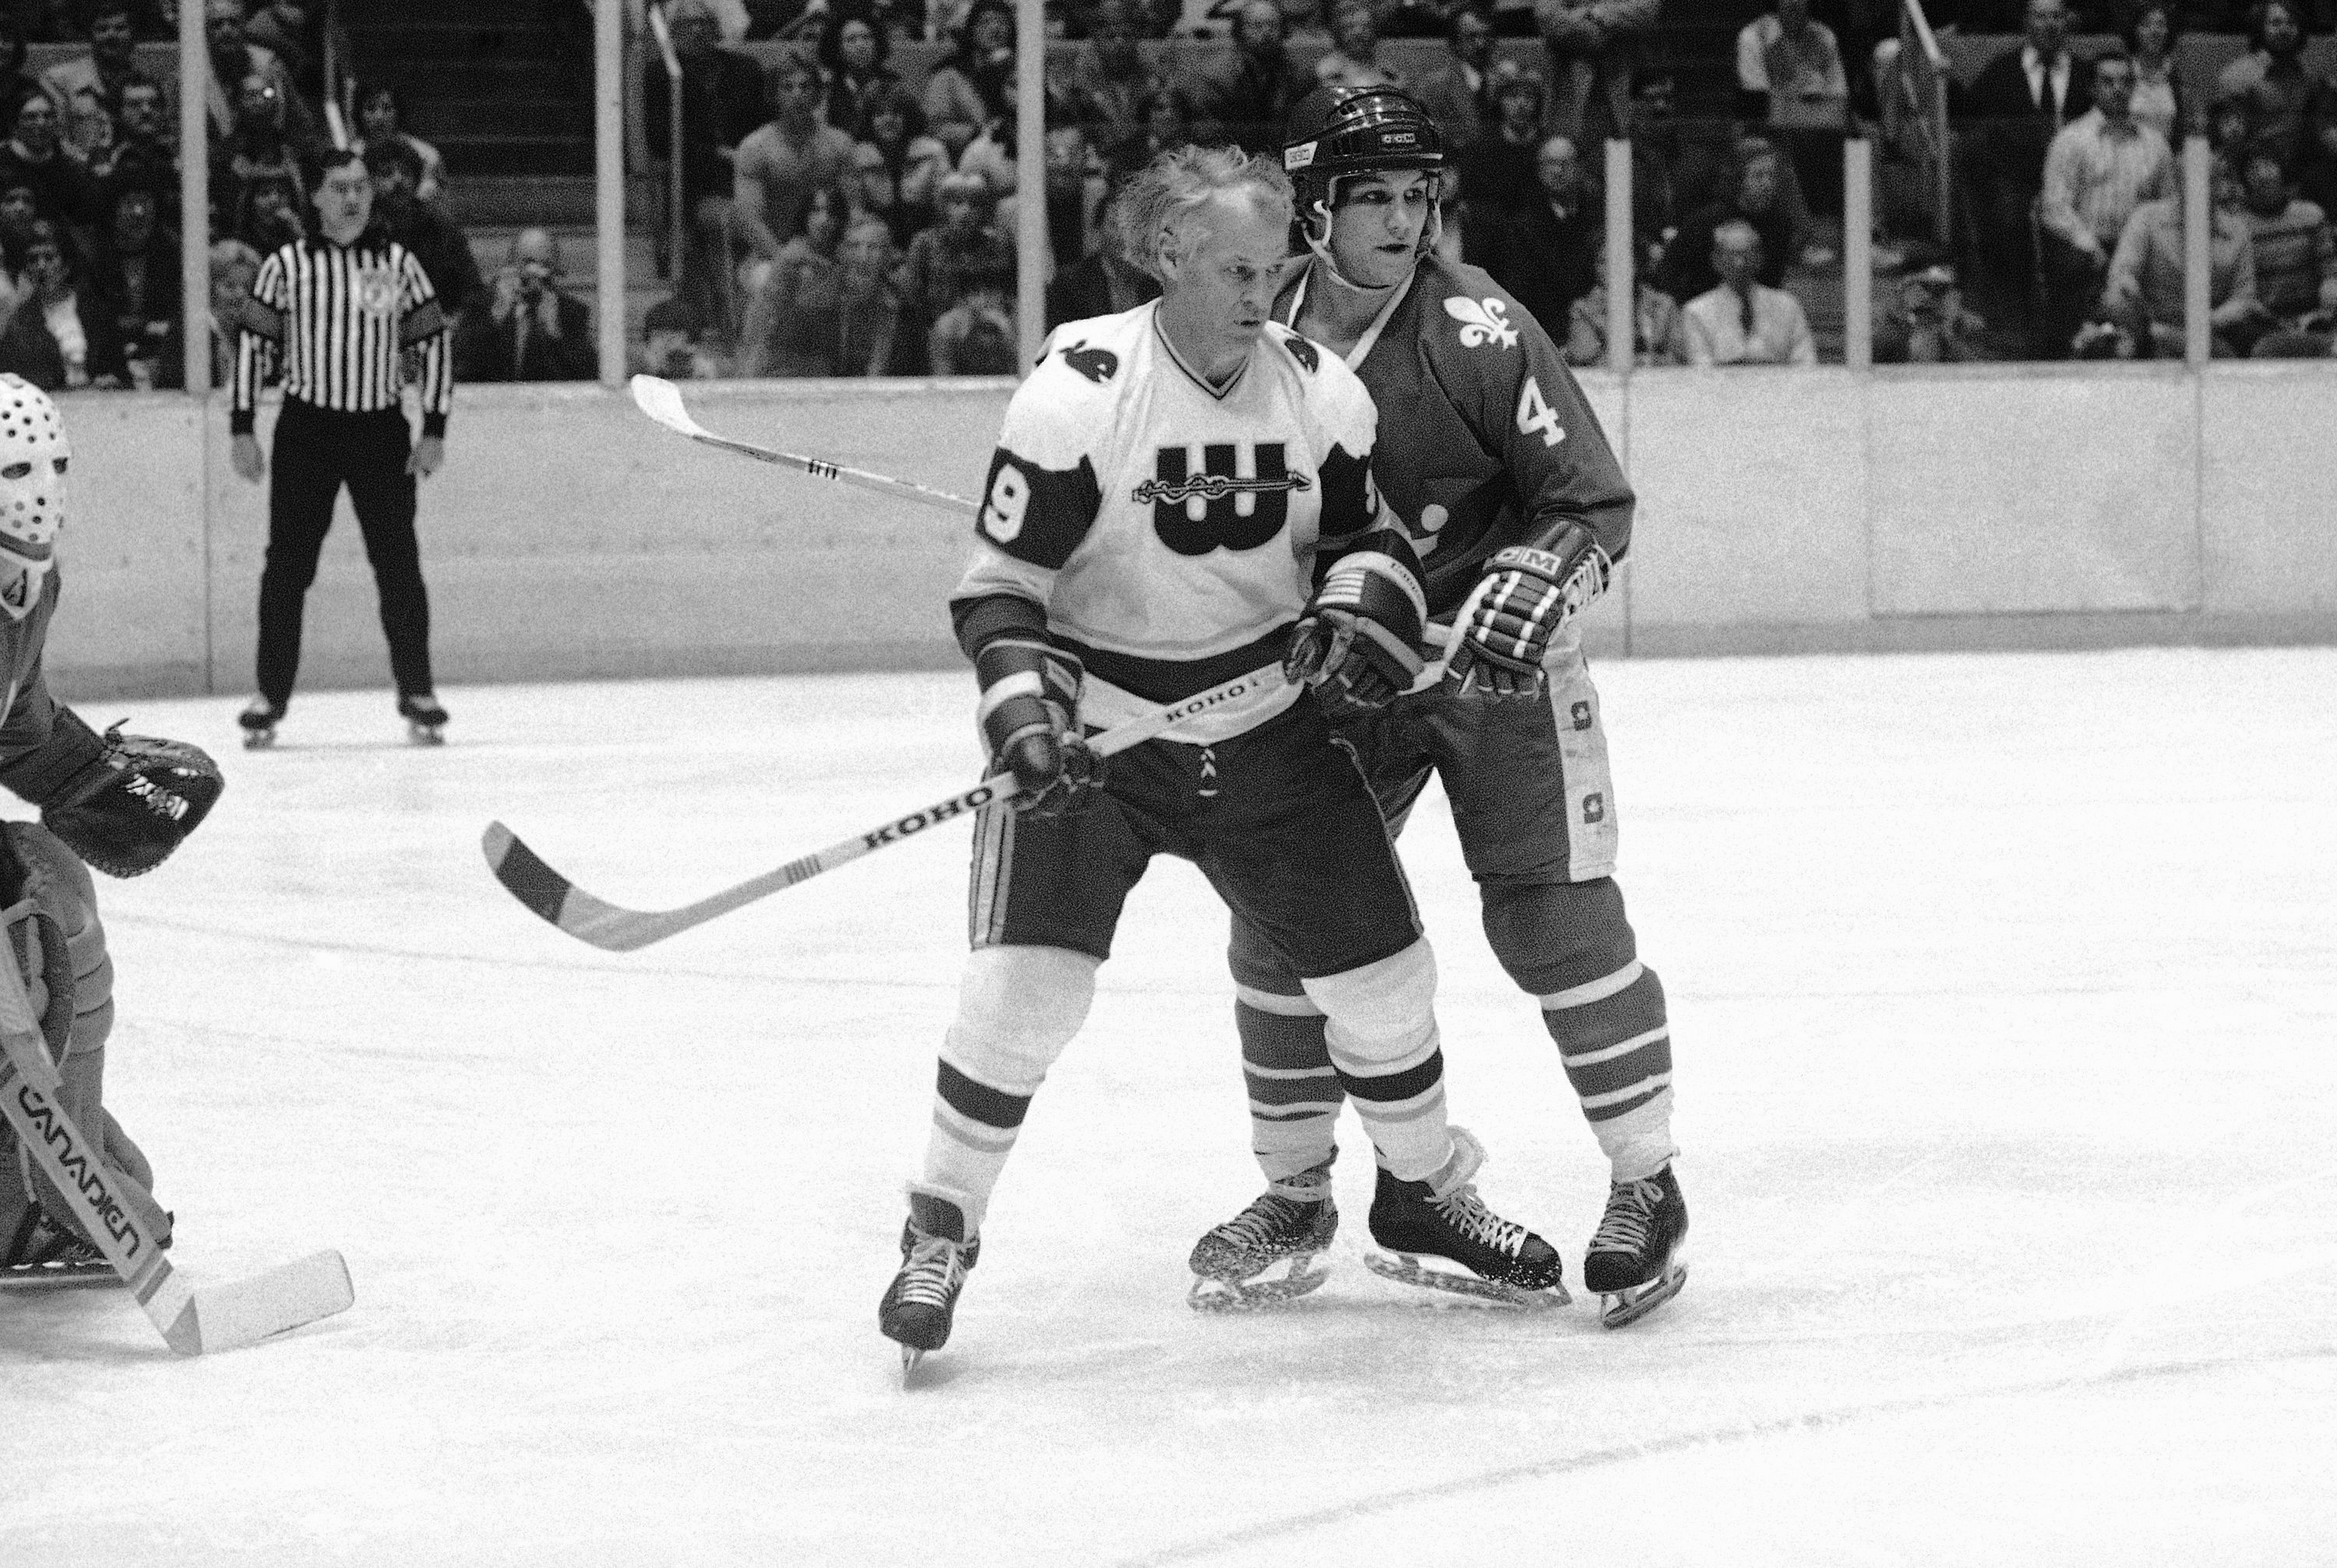 The Whalers were feeling very much at home in Hartford in 1976